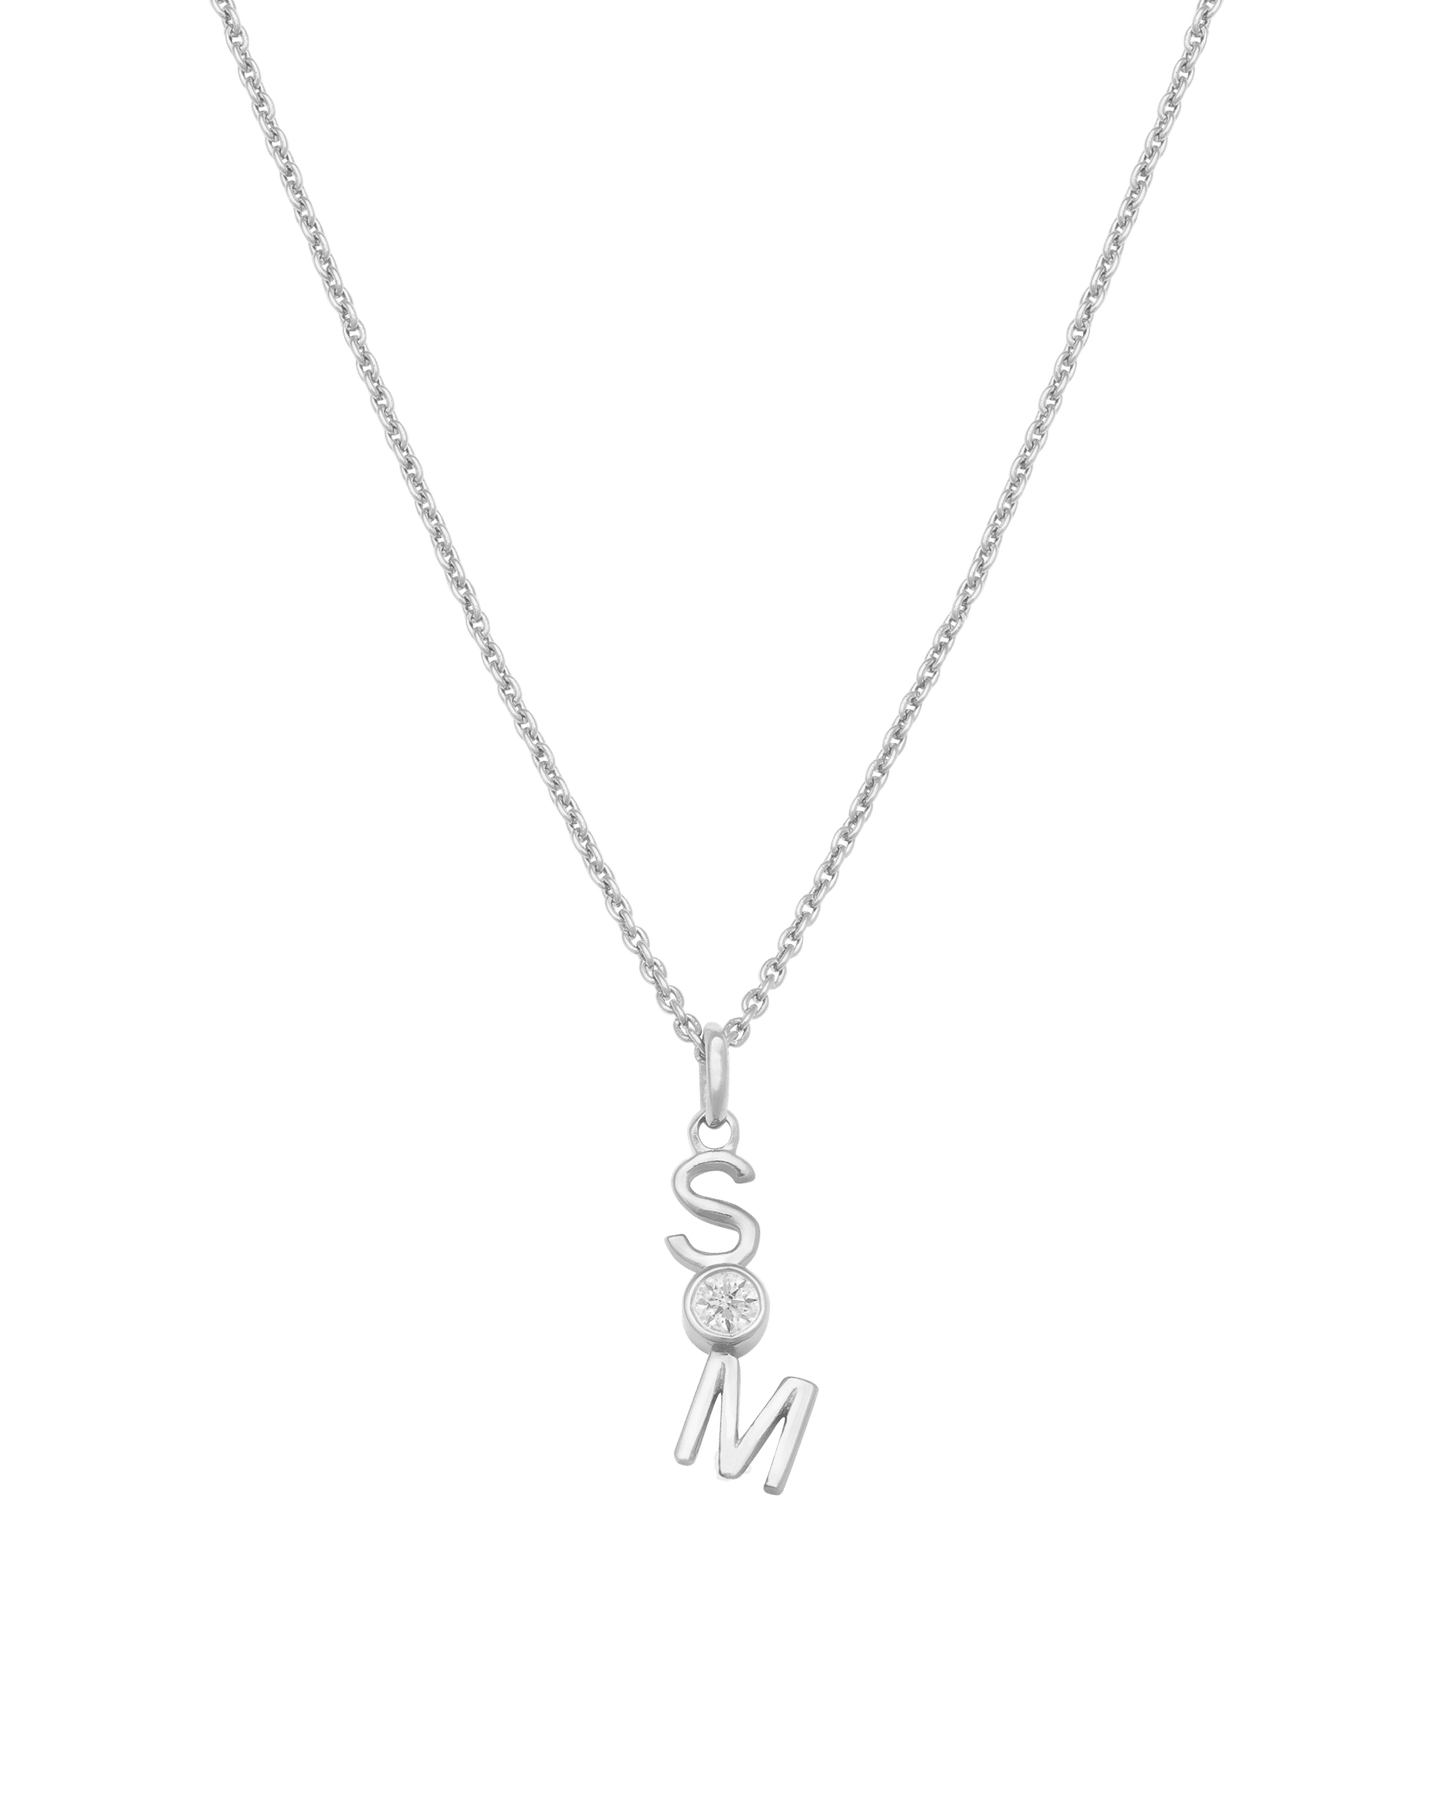 Verti Necklace - 925 Sterling Silver Necklaces 925 Silver 1 Initial + 1 Diamond 14"-16" adjustable 